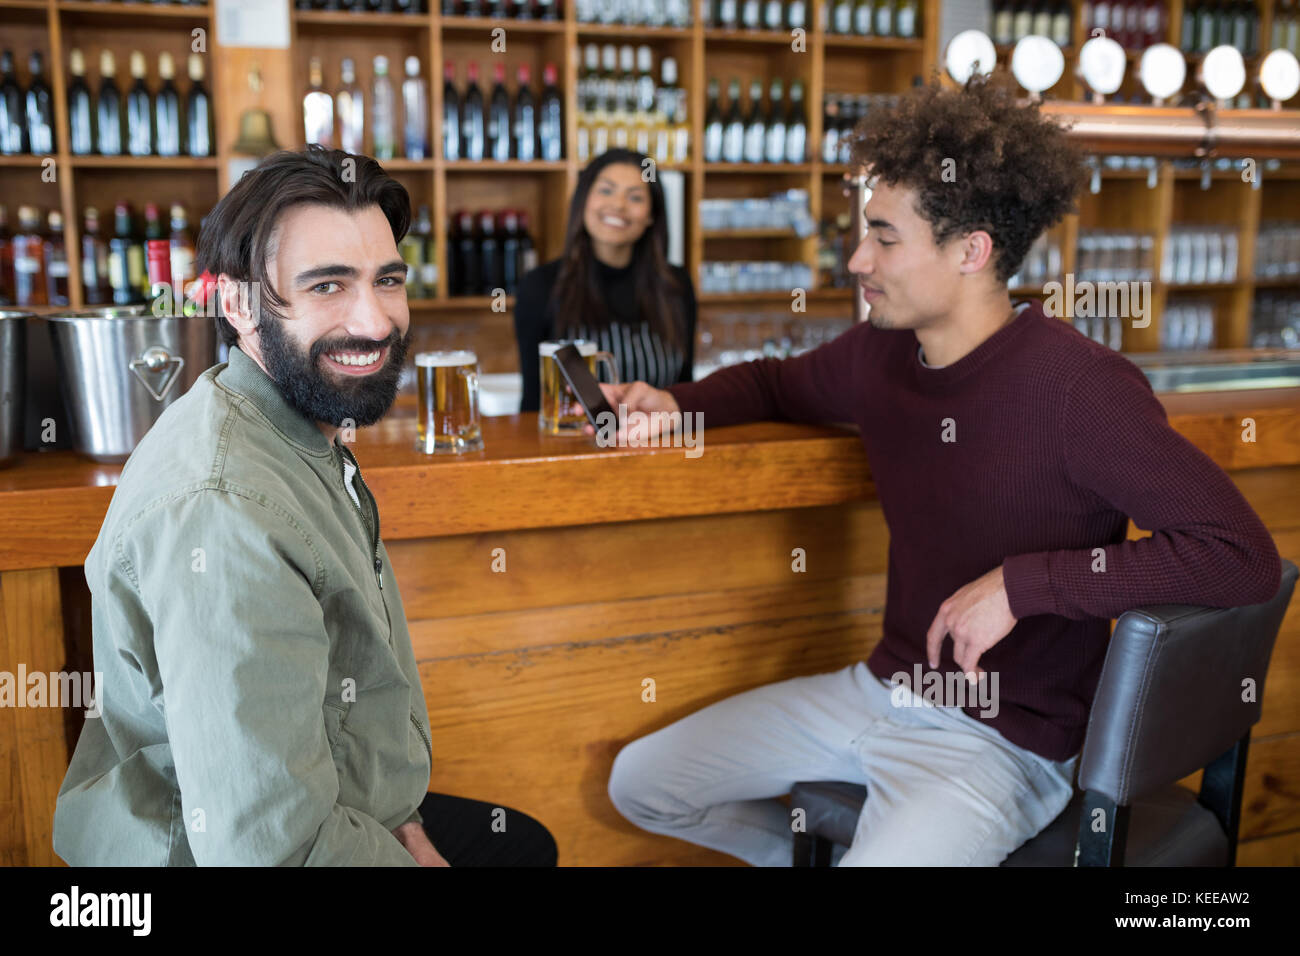 Waitress standing at counter while two men using mobile phone in bar Stock Photo